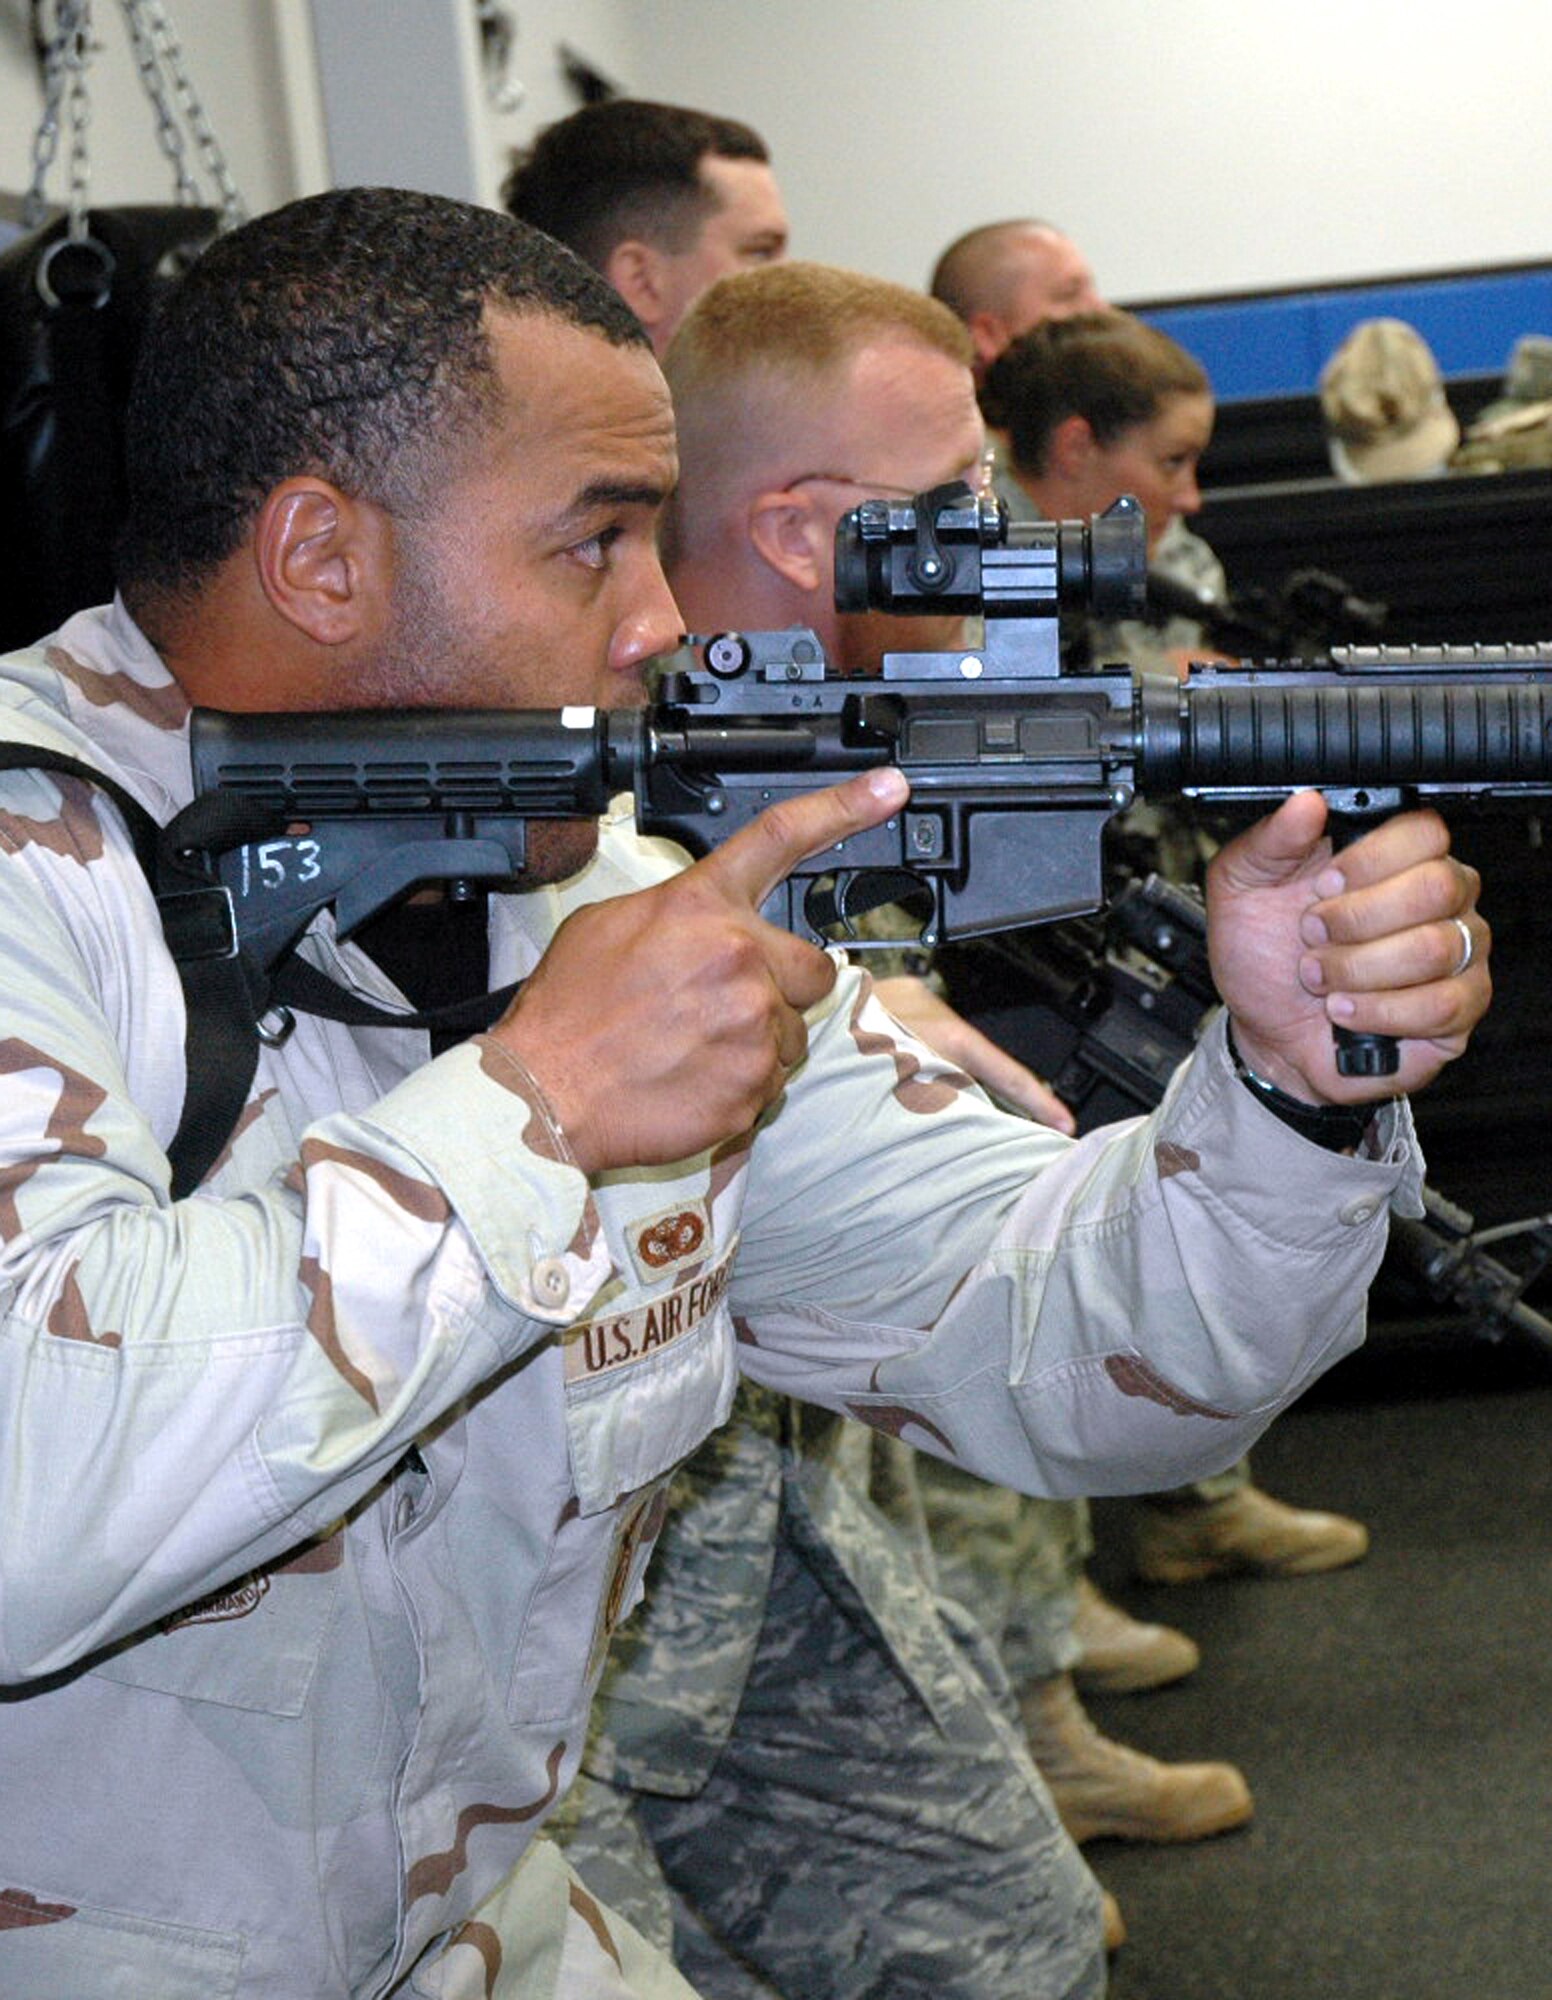 Students in the Air Force Phoenix Warrior Training Course participate in "tape drills" for training in mobile operations in urban terrain in the U.S. Air Force Expeditionary Center June 19, 2008, on Fort Dix, N.J.  The course, taught by the USAF EC's Expeditionary Operations School and the 421st Combat Training Squadron, prepares security forces Airmen for upcoming deployments.  (U.S. Air Force Photo/Tech. Sgt. Scott T. Sturkol)